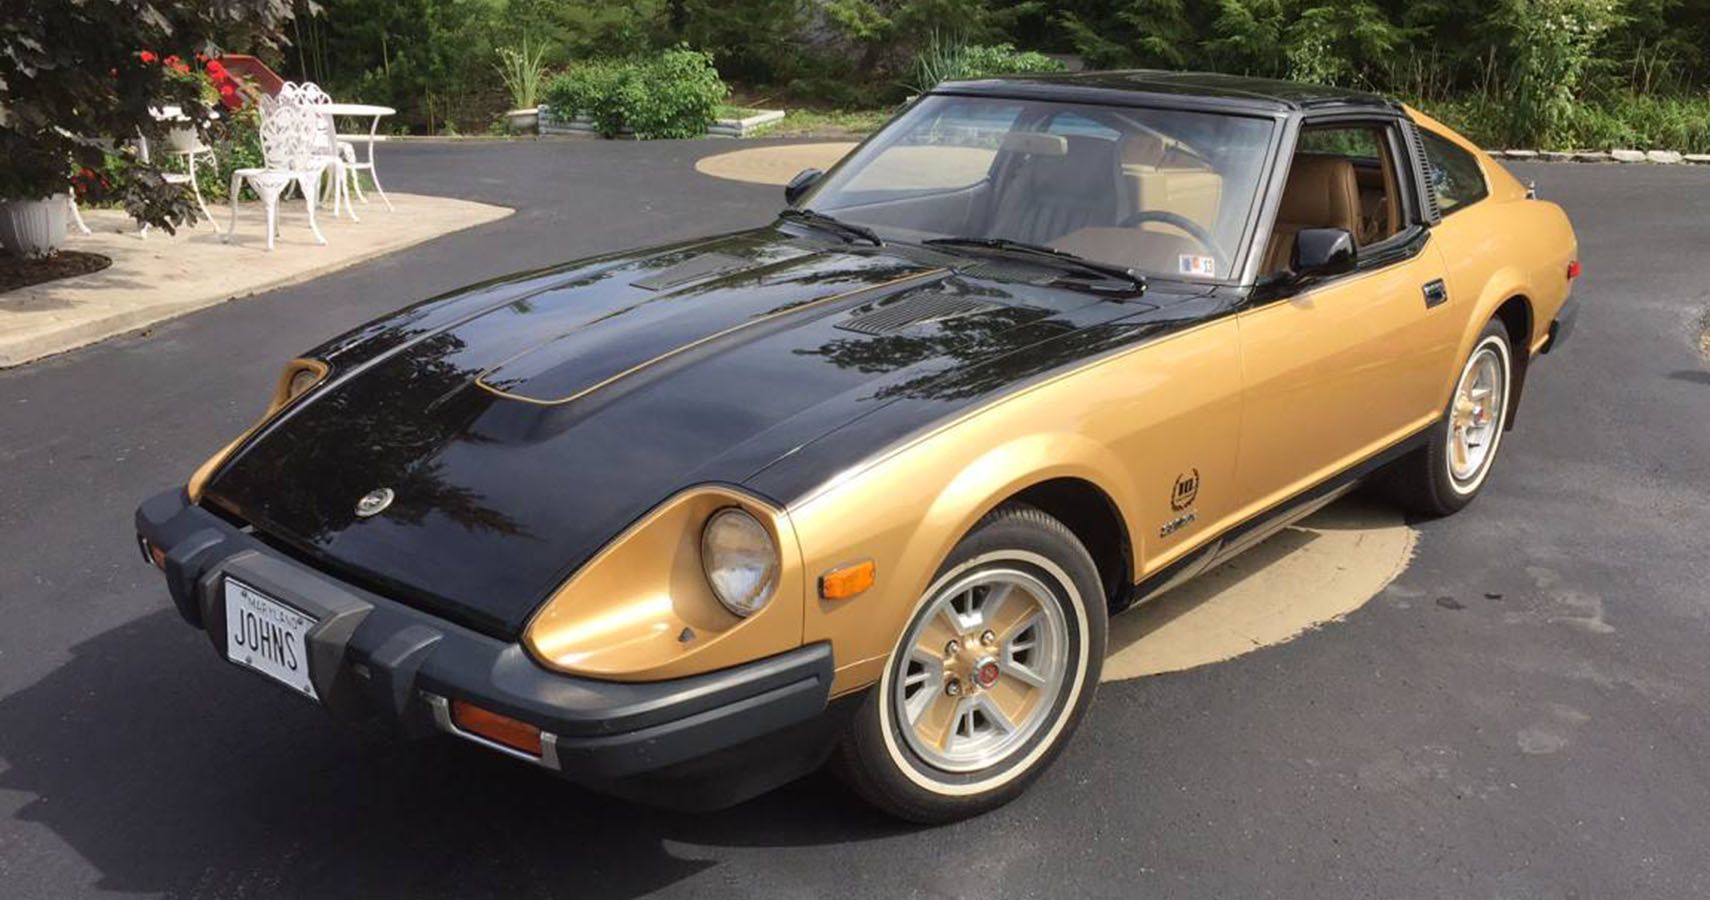 This Is The Best Feature Of The Datsun 280ZX Anniversary Edition